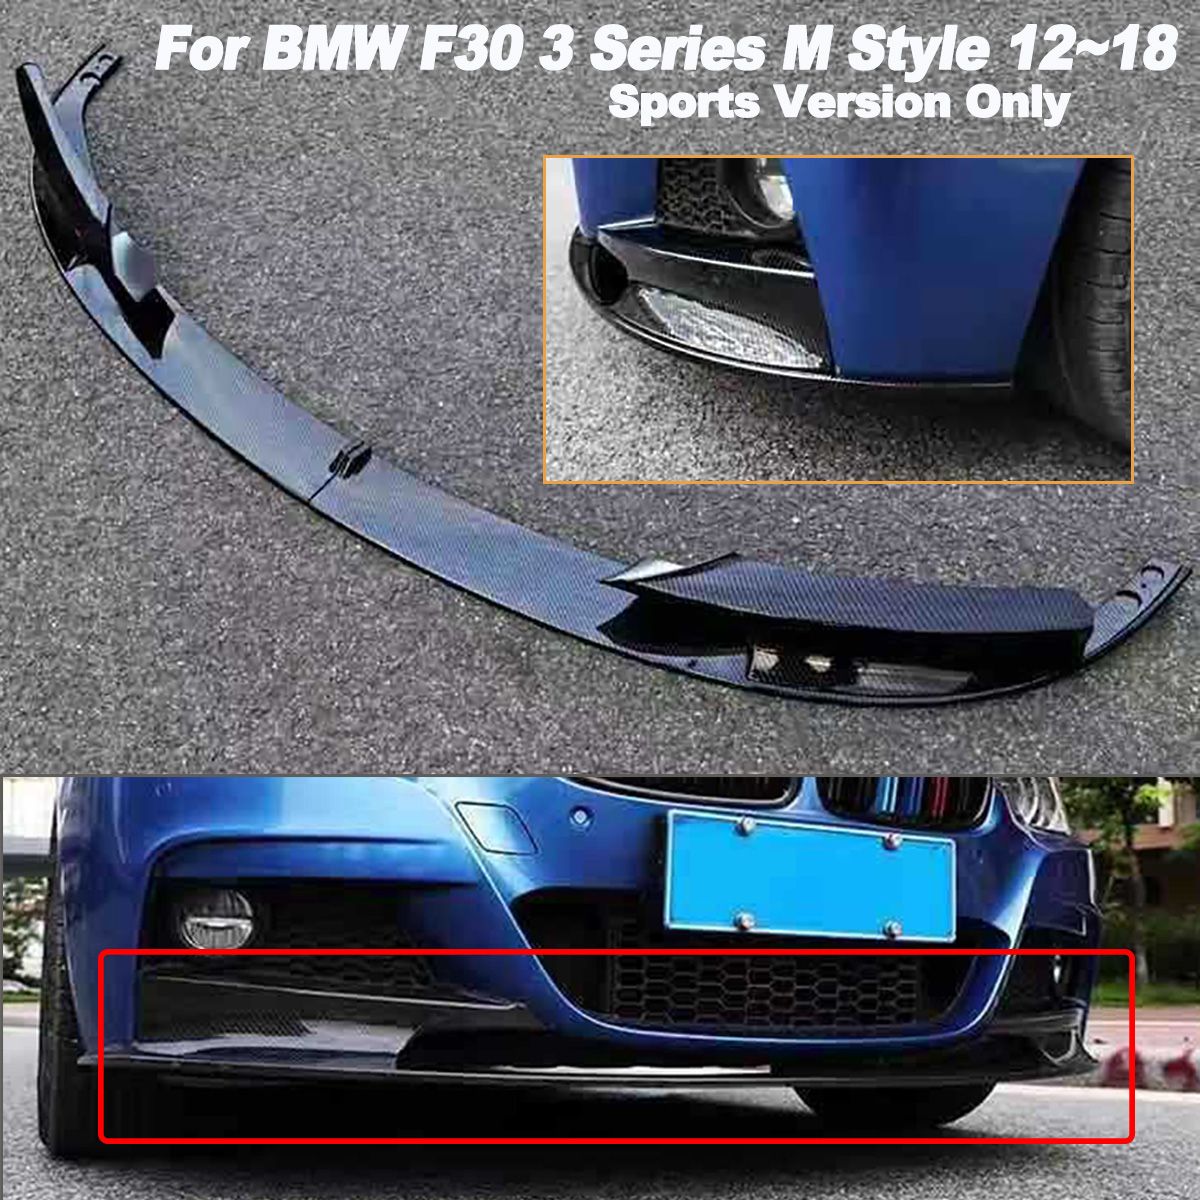 Carbon-Fiber-Style-M-Sport-Two-section-Front-Diffuser-Splitter-Lip-Tools-Kit-For-BMW-F30-3-Series-20-1571559